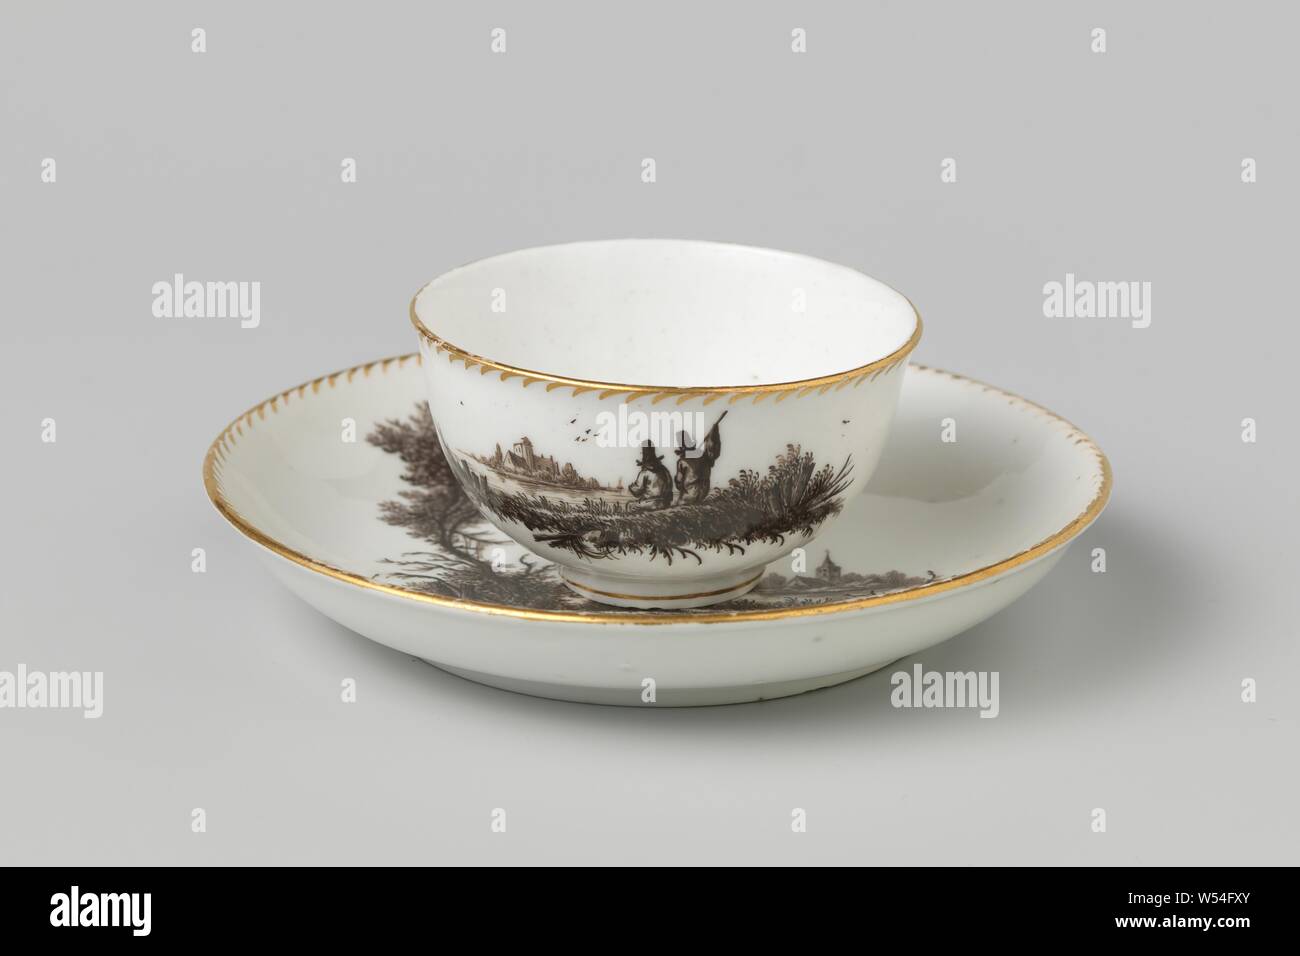 Cup and saucer with river view, Porcelain cup and saucer. Painted with a river view with two mans figures and a large tree in the foreground. All edges in gold., Manufactuur Oud-Loosdrecht, Loosdrecht, 1774 - 1784, porcelain (material), h 4.0 cm × d 6.9 cm × h 2.3 cm × d 12.7 cm Stock Photo